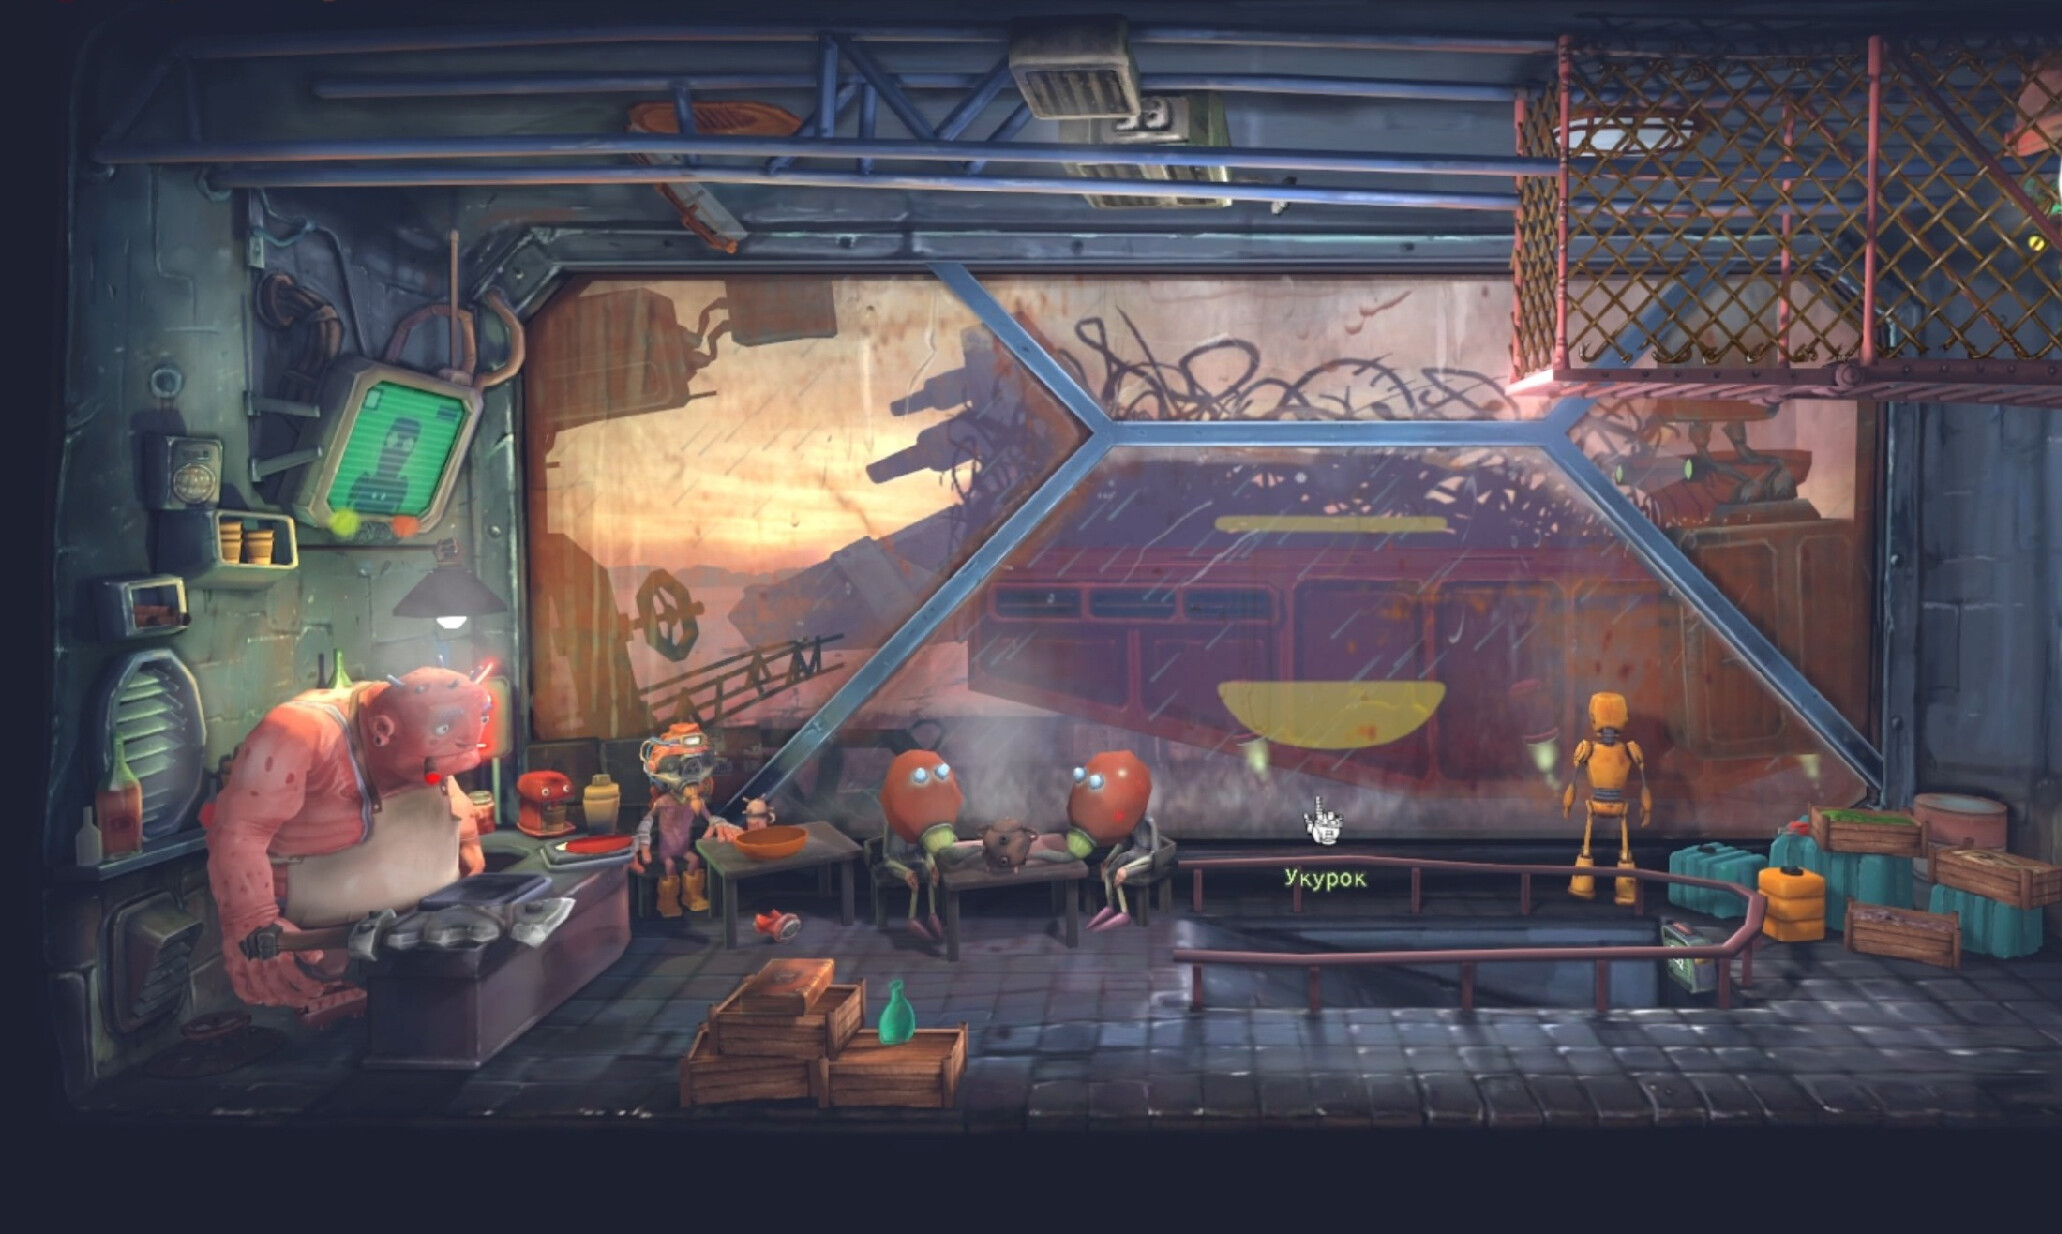 Mechanic 8230 (Game): A new stylized world with an illustrative atmosphere of retrofuturism. 2070x1240 HD Wallpaper.